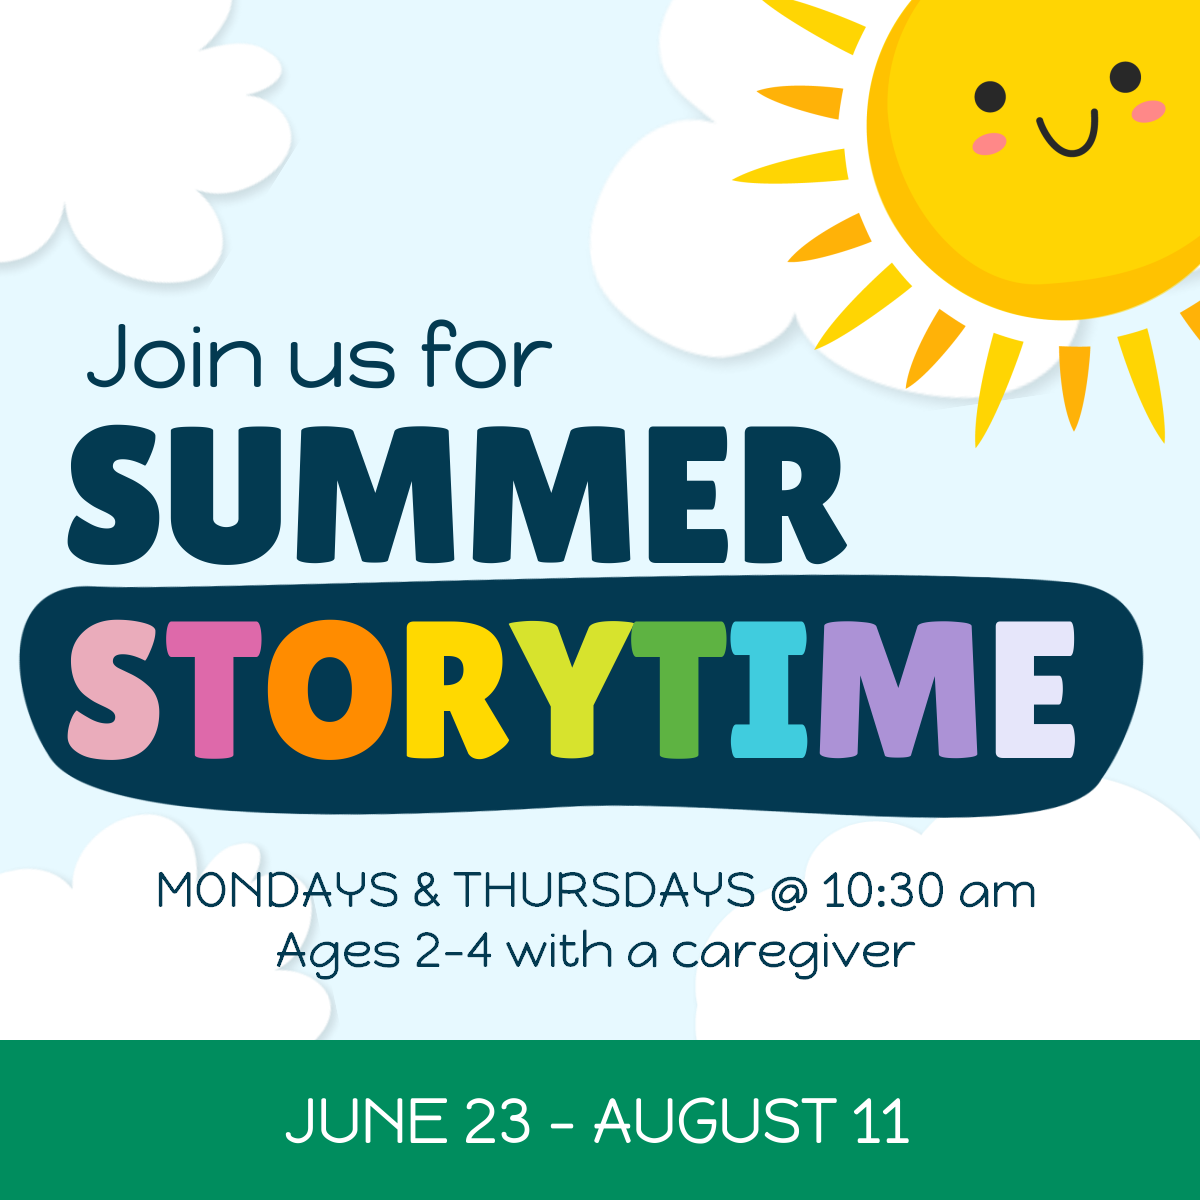 Summer Storytime Mondays and Thursdays at 10:30am June 23-August11